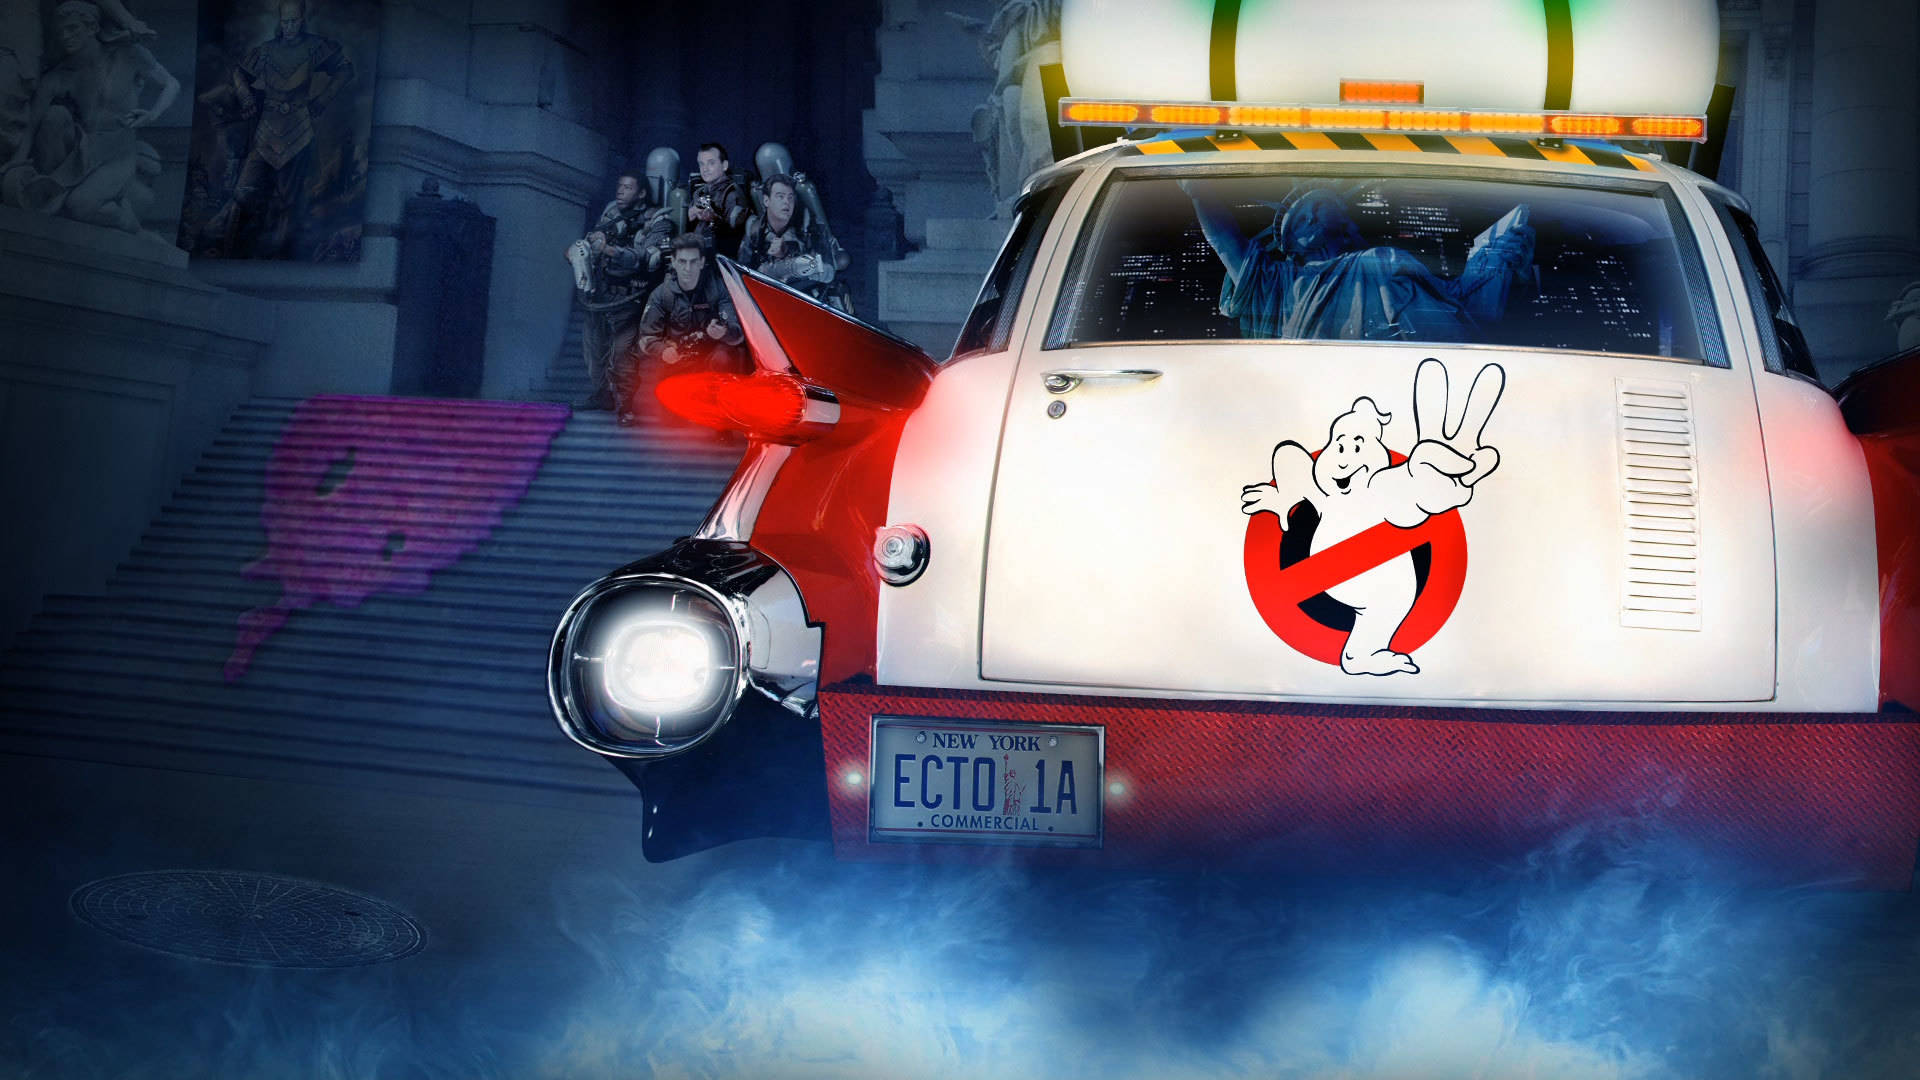 The Ghostbusters Put Their Ecto-1 To The Test In The Streets Of New York Background